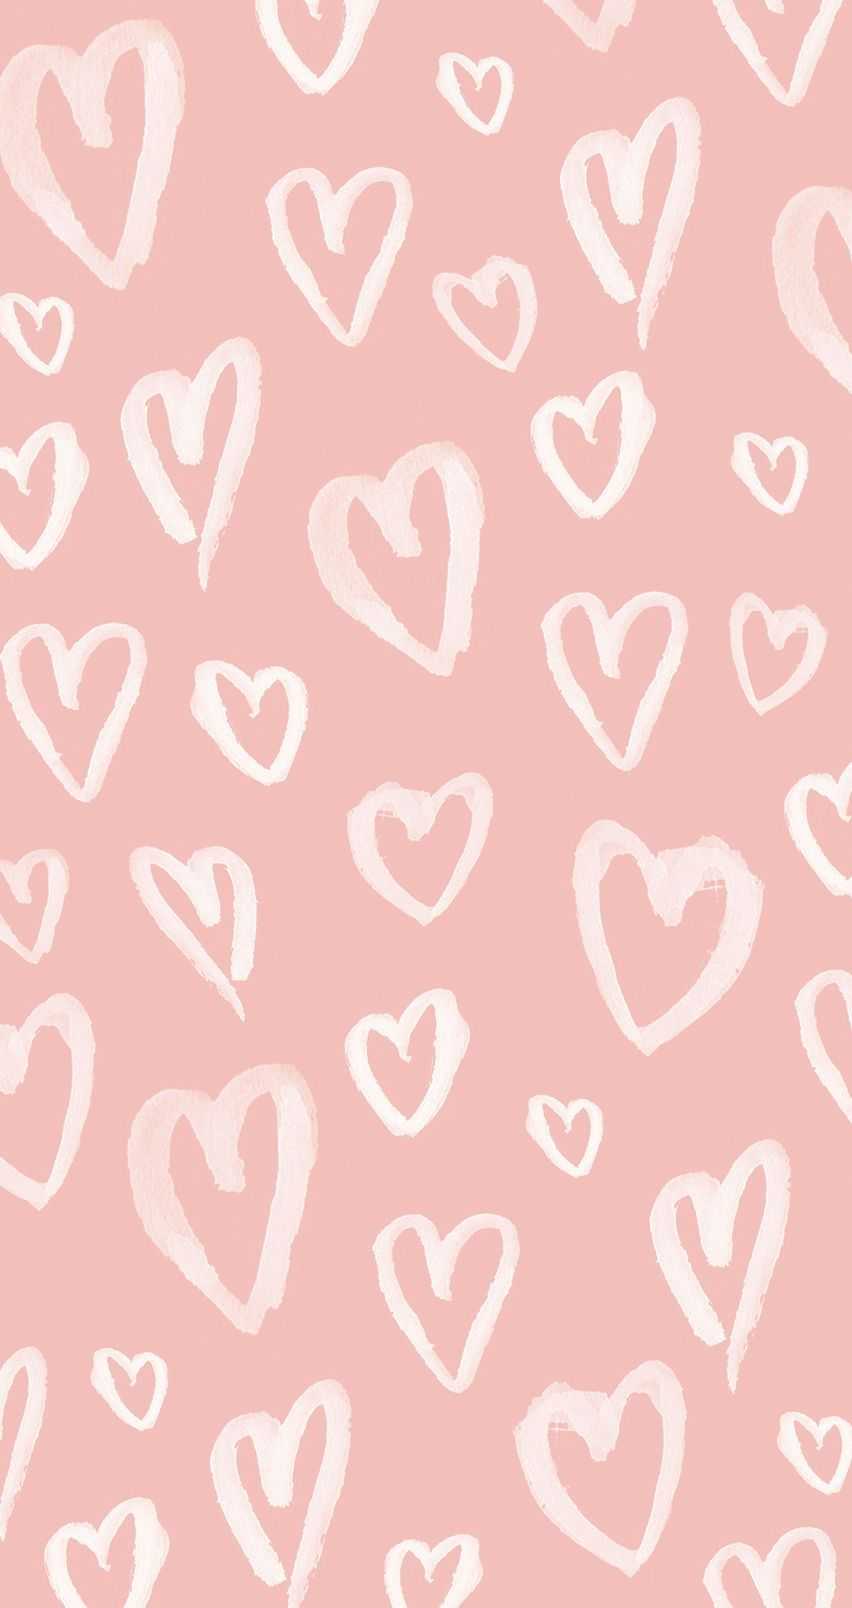 Pink heart shaped paper on white and pink floral textile photo – Free Heart  Image on Unsplash